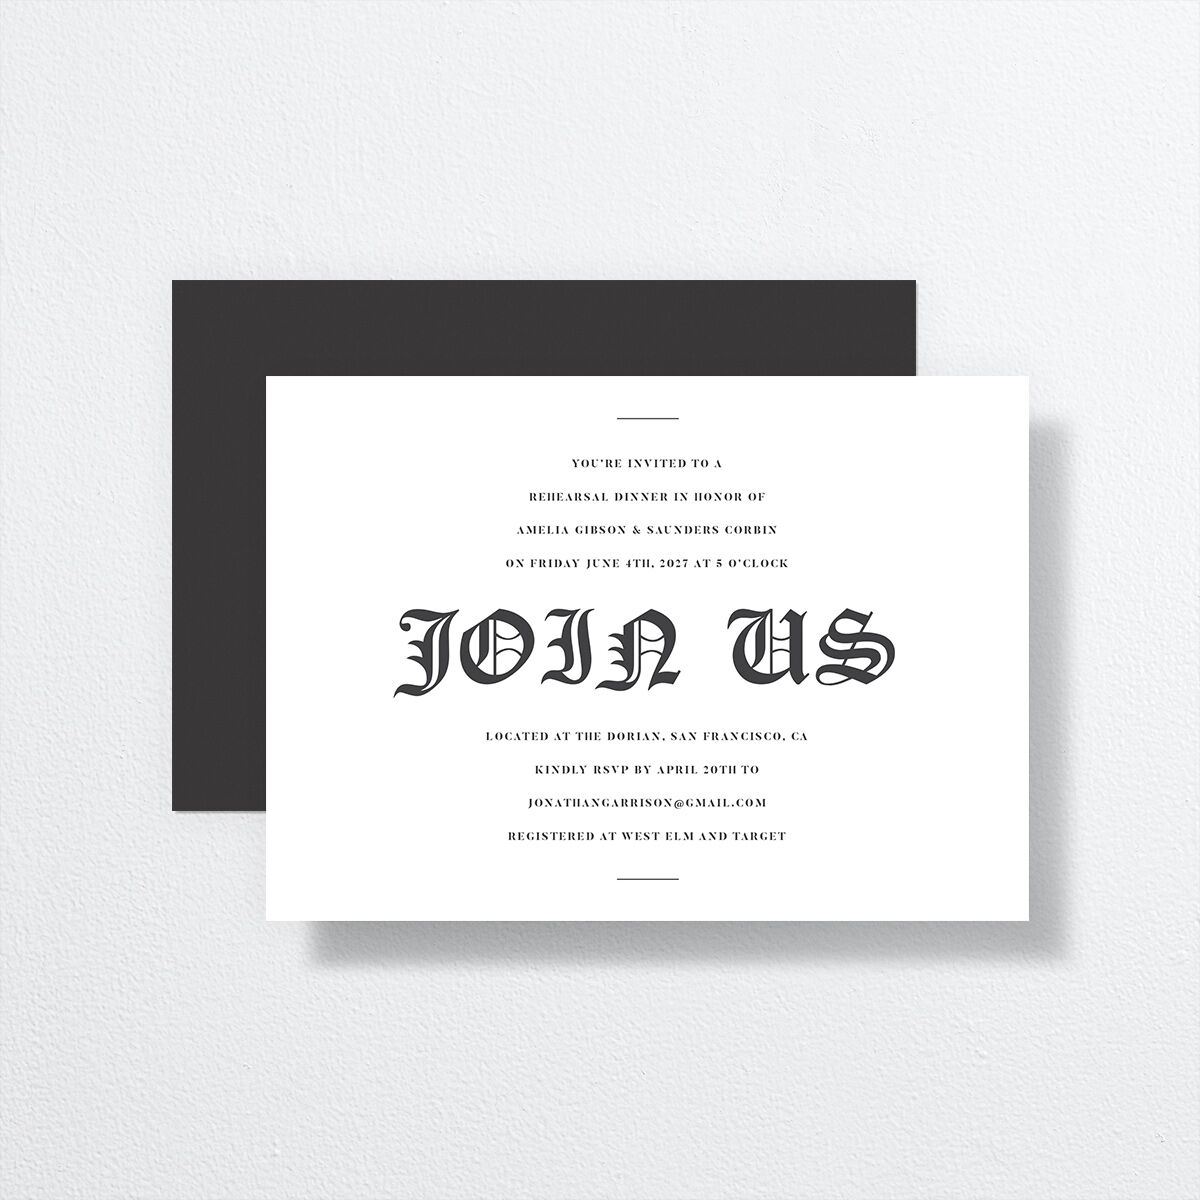 I Do Rehearsal Dinner Invitations by Vera Wang front-and-back in white